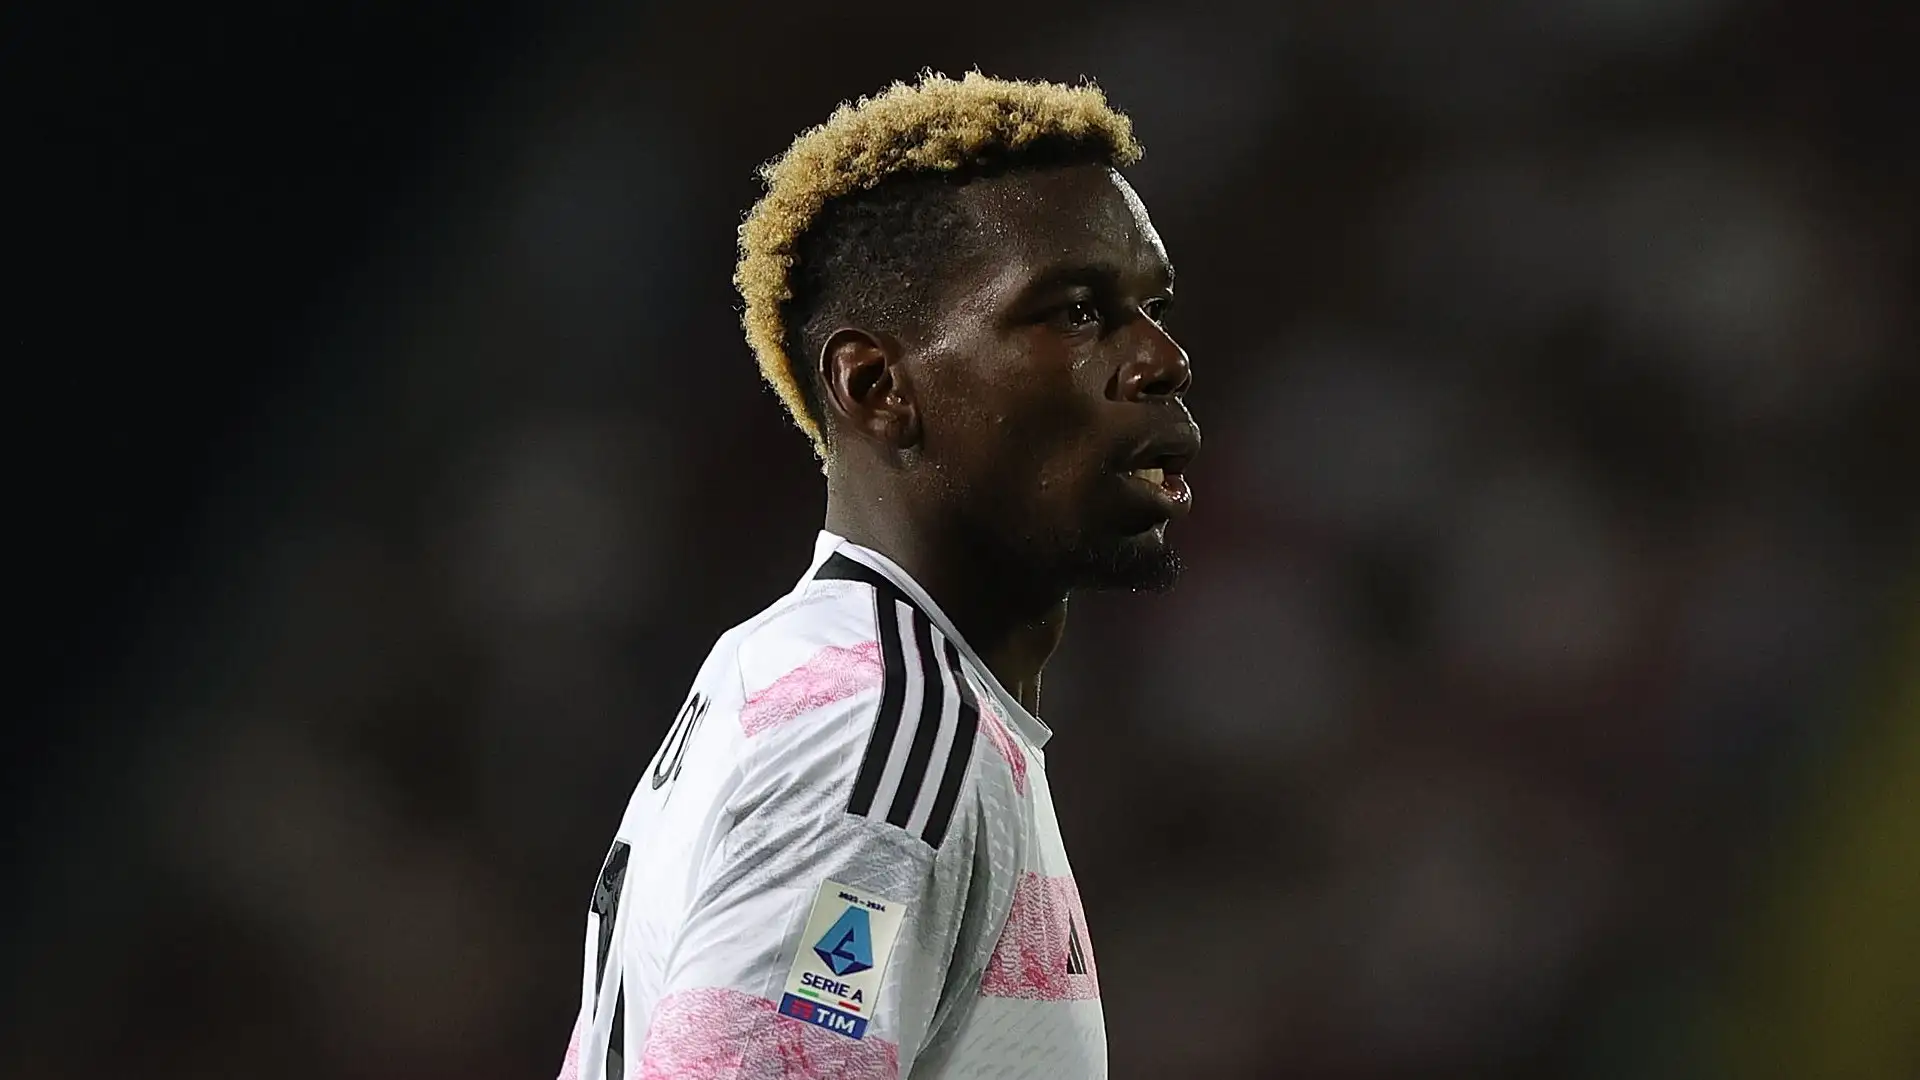 Paul Pogba sends two-word message to Massimiliano Allegri as banned Juventus midfielder breaks silence on club's decision to axe manager after Coppa Italia success